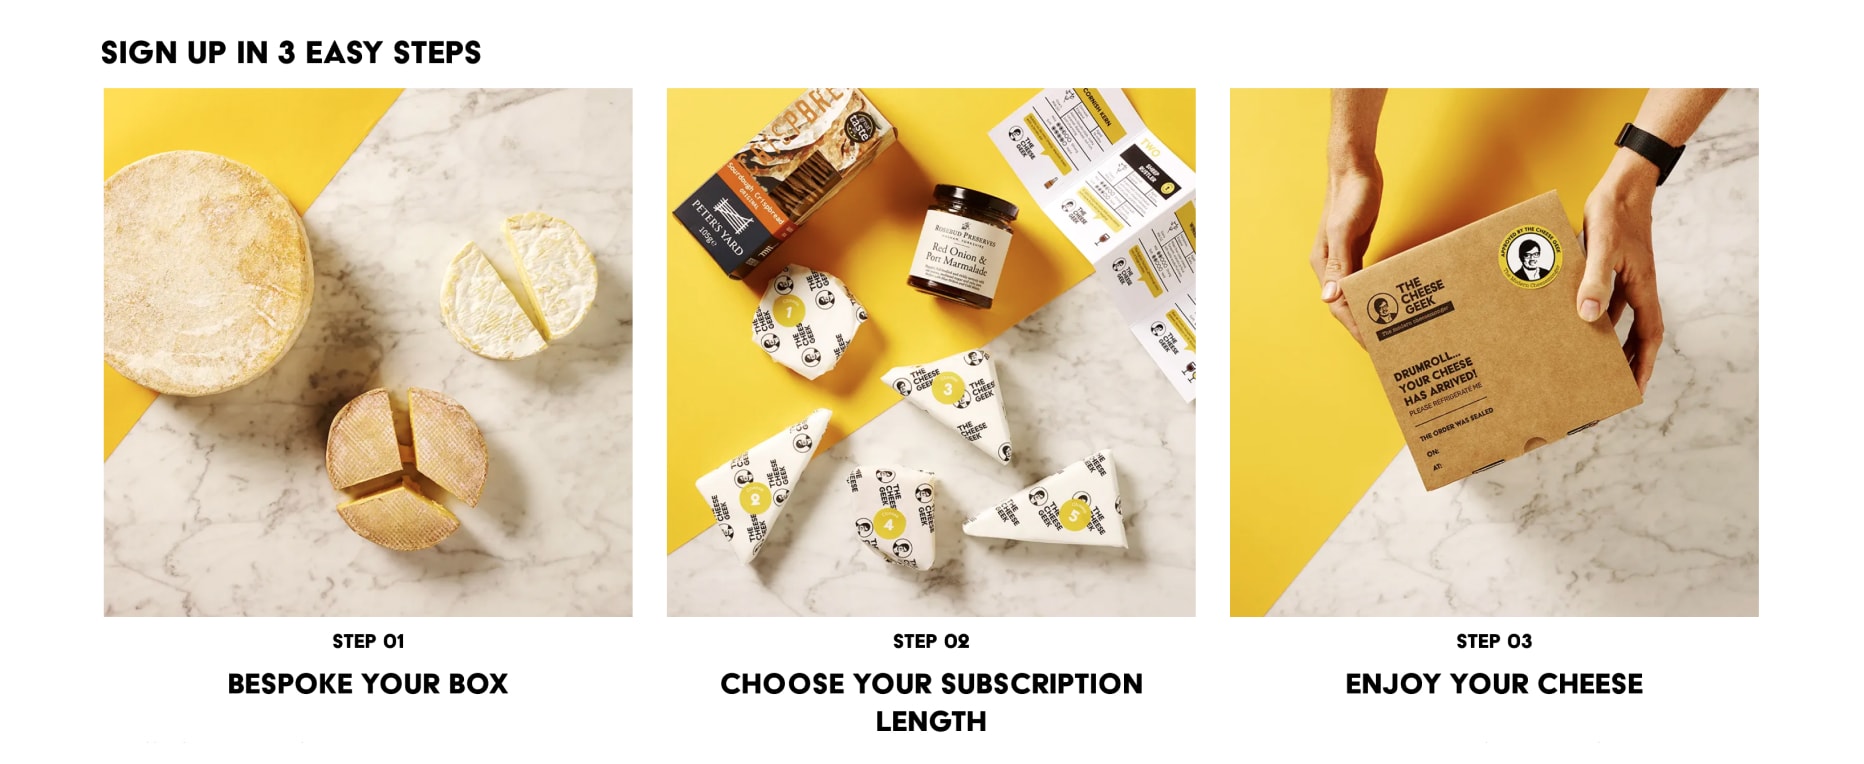 An example sign up flow from The Cheese Geek's storefront